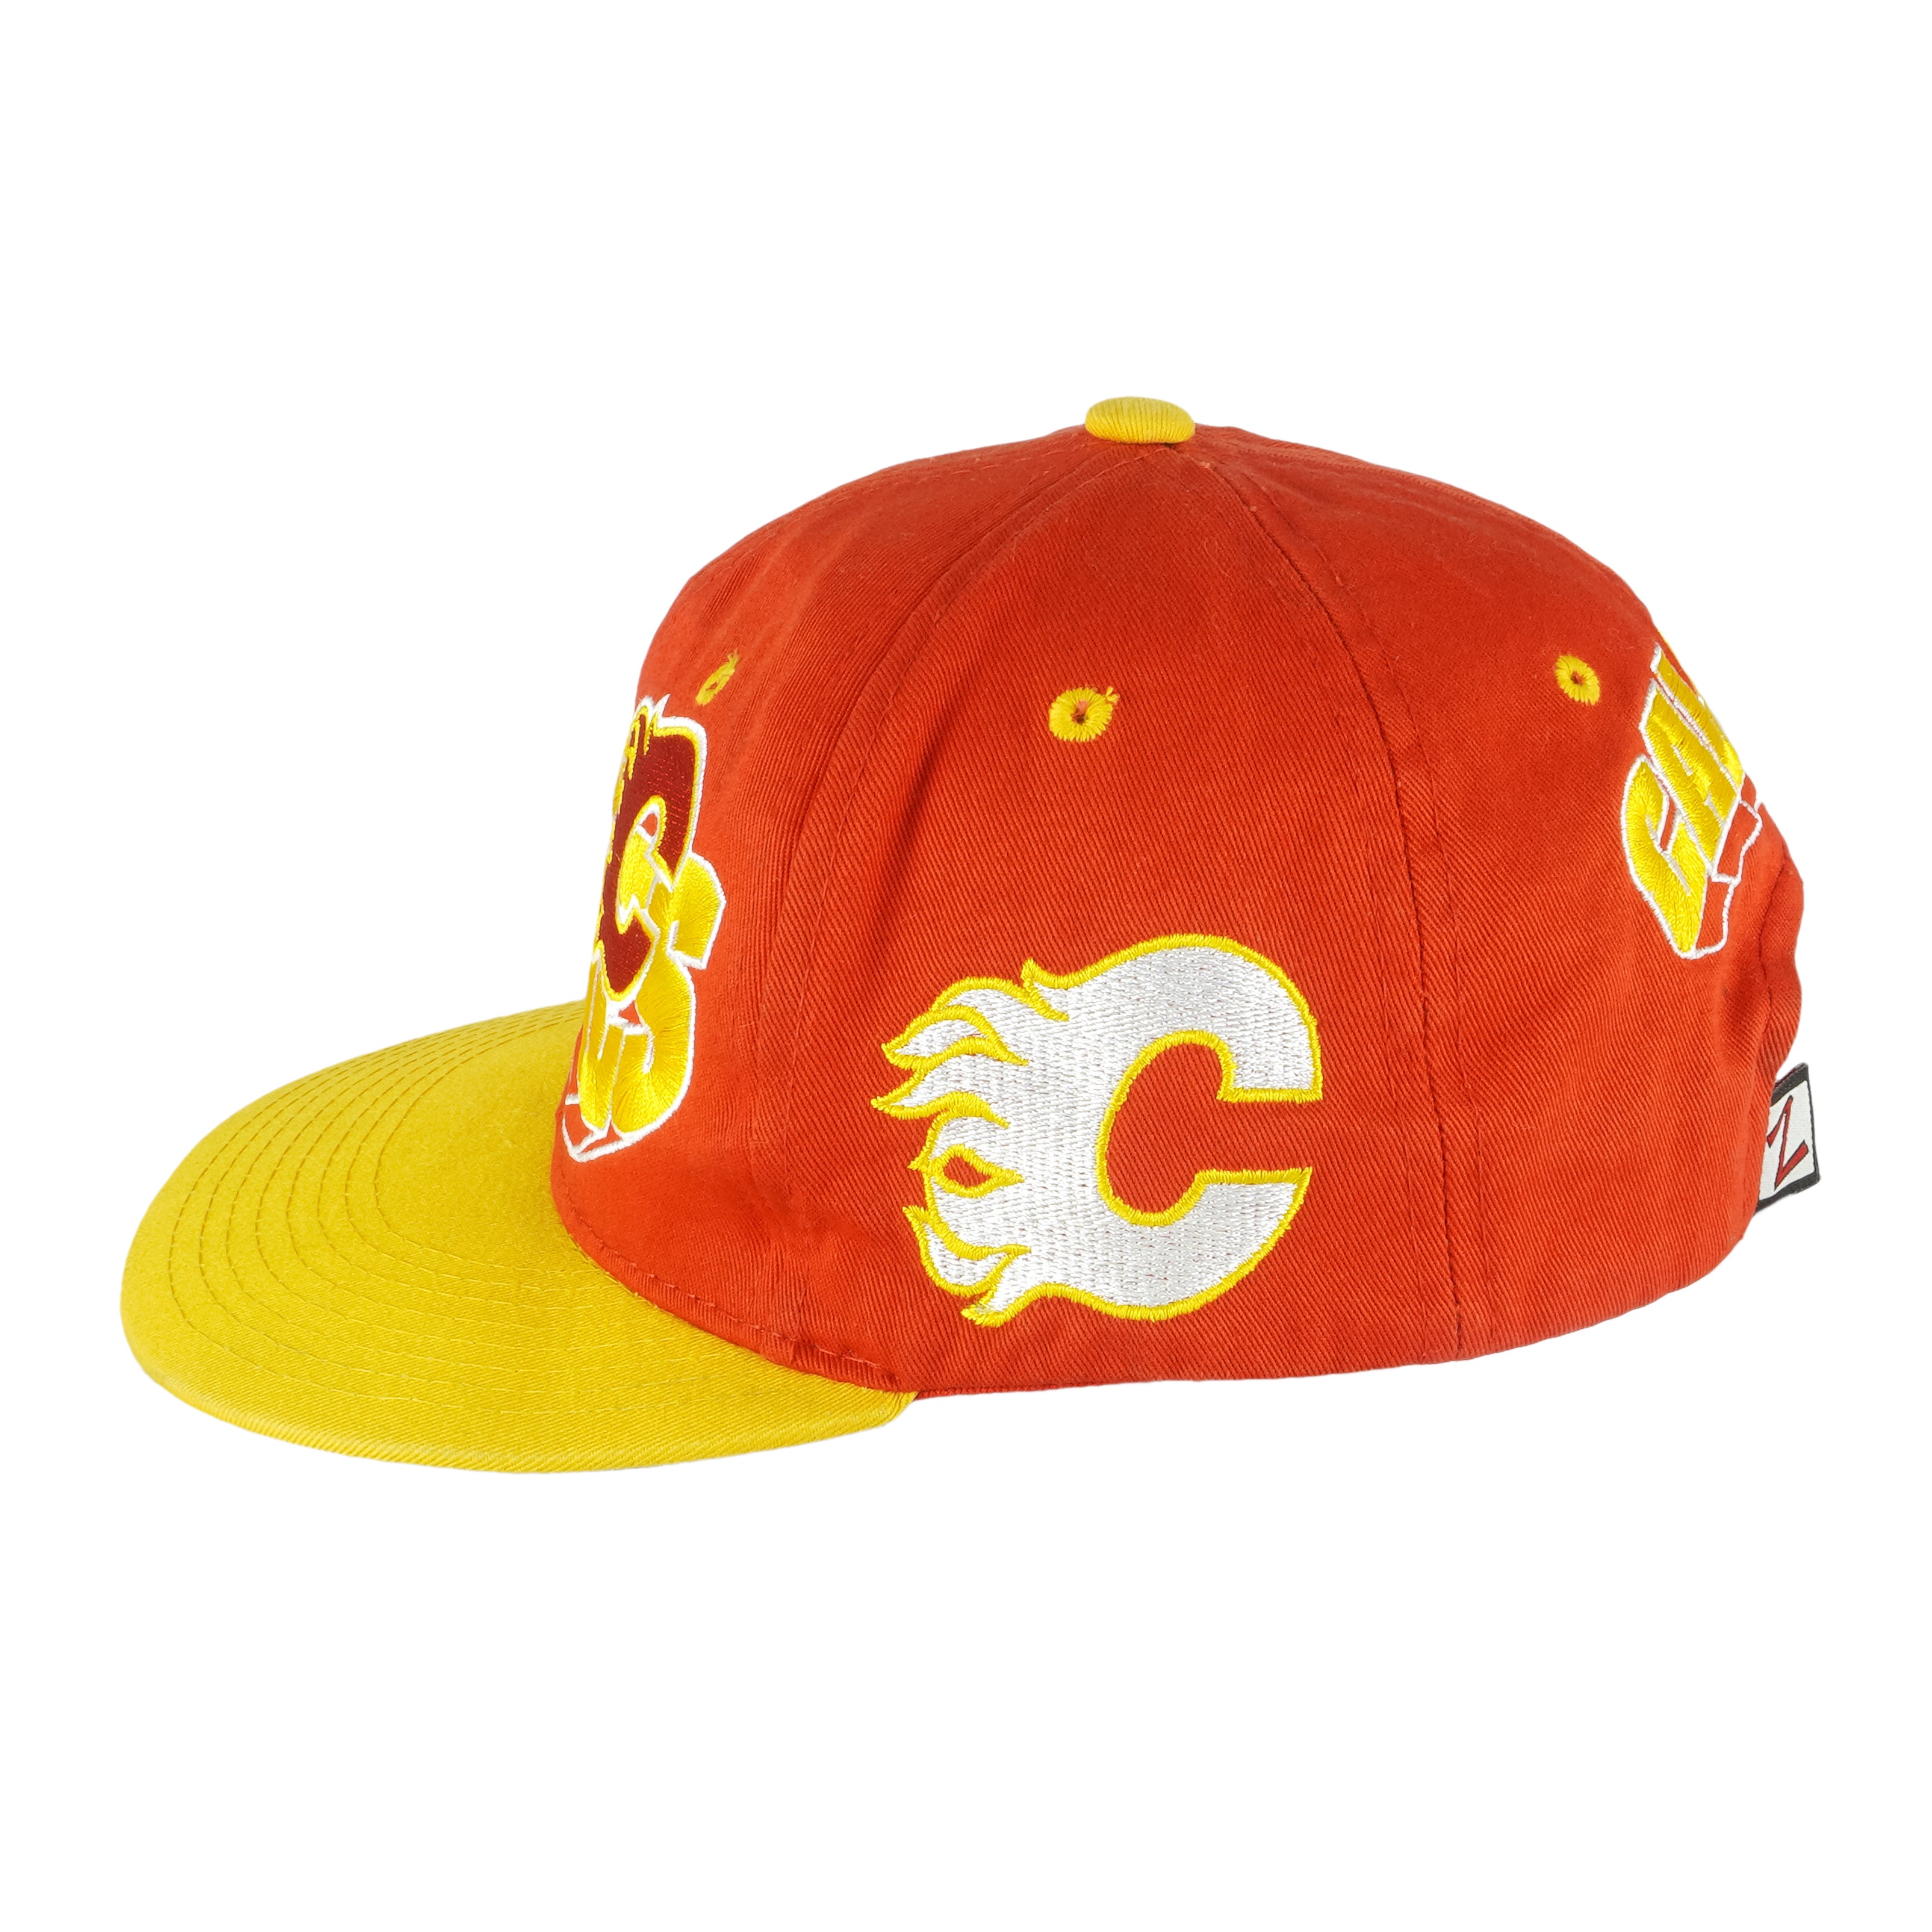 Calgary flames nhl hockey fitted hat size 7 3/4 vintage vtg